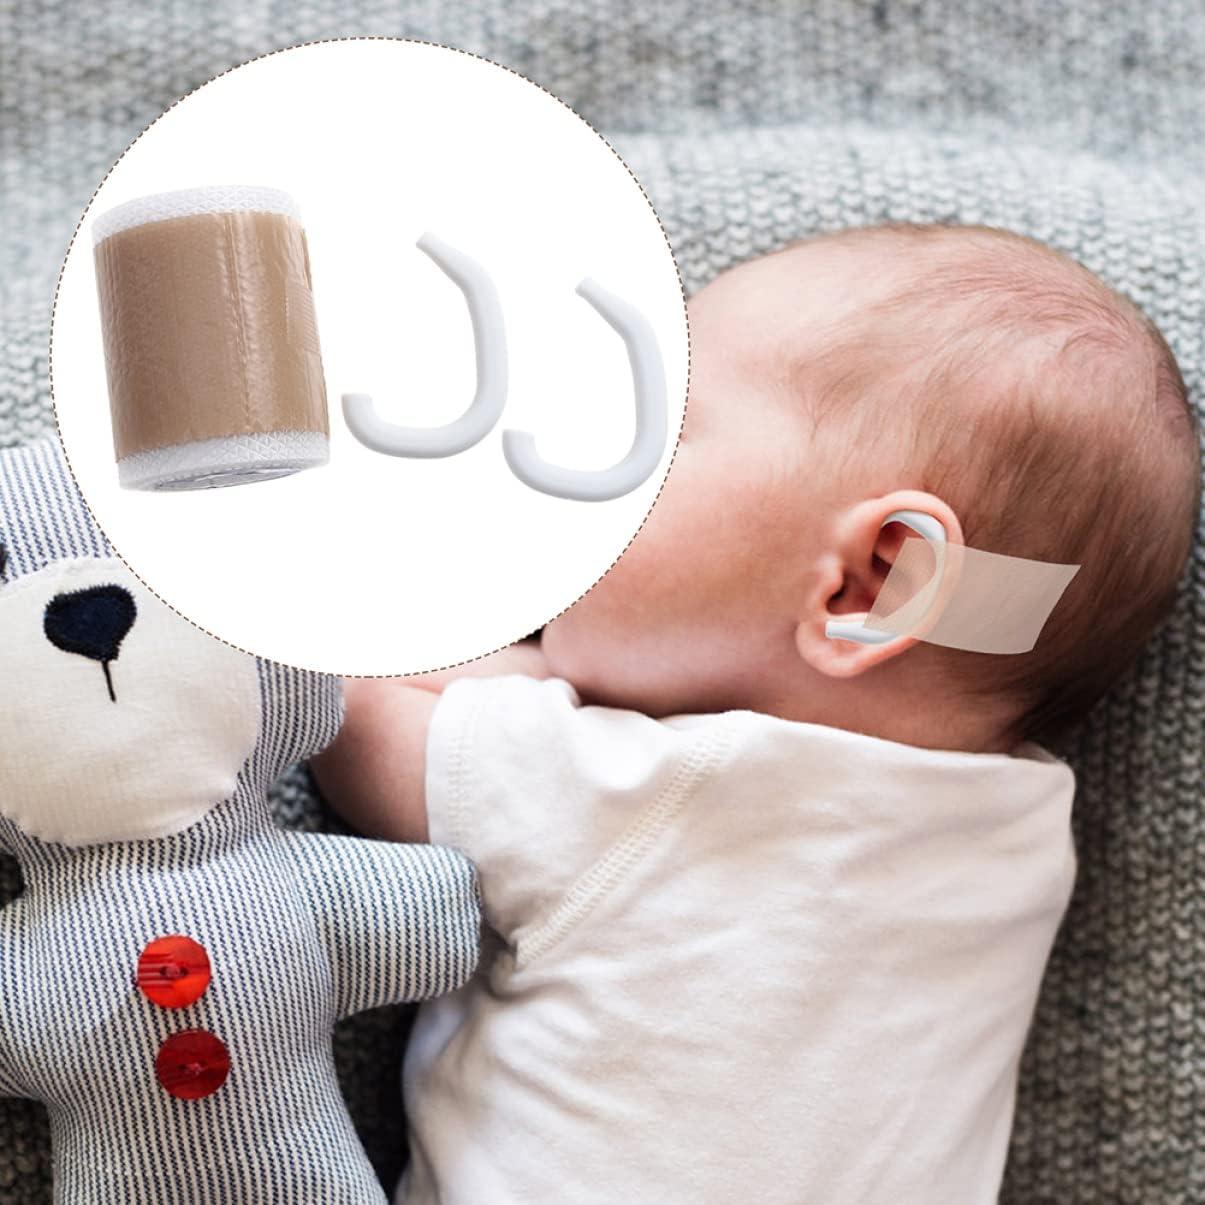 Ear Corrector for Babies Baby Ear Corrector Newborn Baby Ear Aesthetic  Corrector Aesthetic Corrector Infant Protruding Ear Patch Stickers,  Children